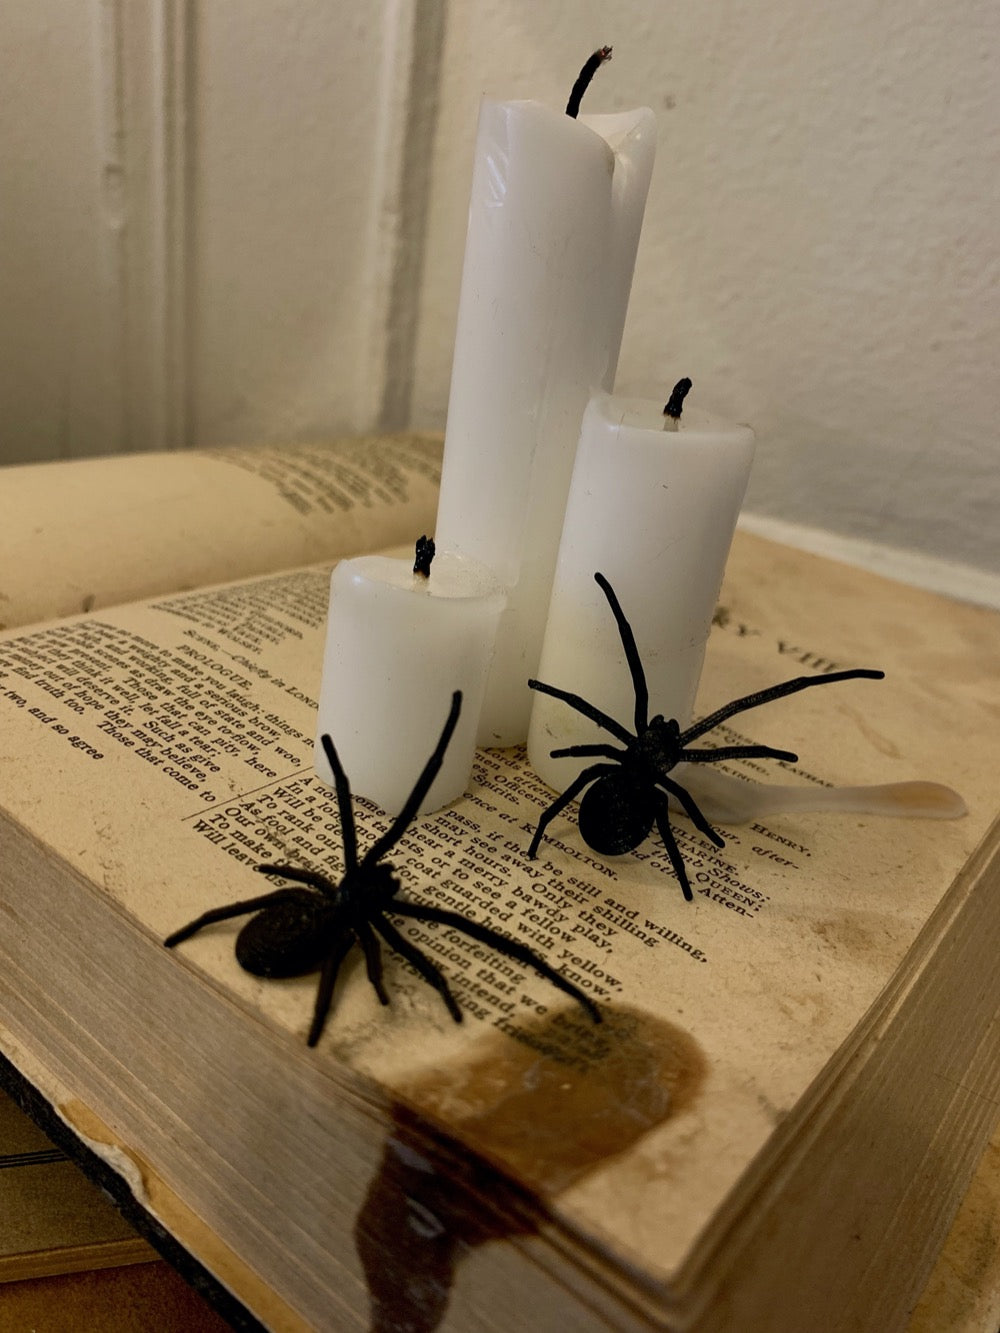 Shown are two black spider earrings that are realistic in their shape. They have long front legs that look like they are searching for their next bit of prey. They are pictured crawling up an old book with candles on top to create a spooky Halloween scene.